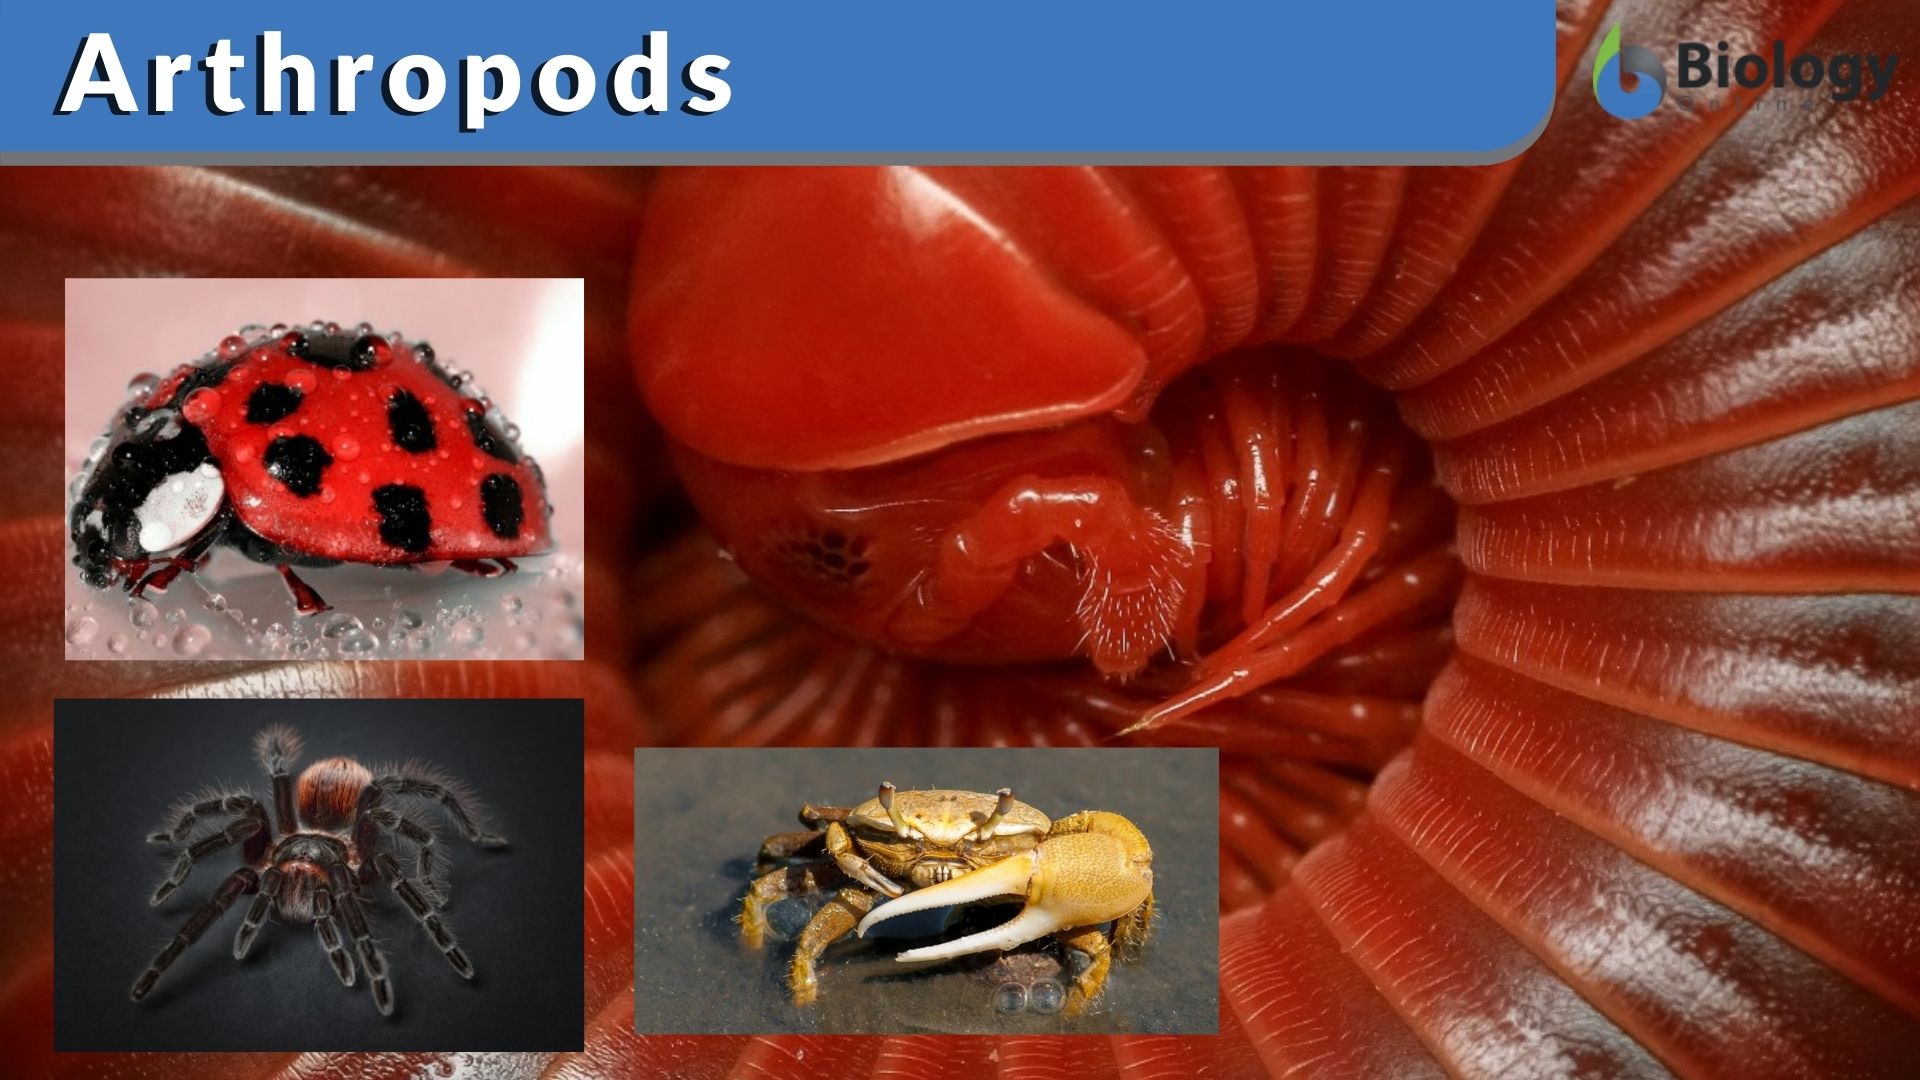 Arthropod - Definition and Examples - Biology Online Dictionary